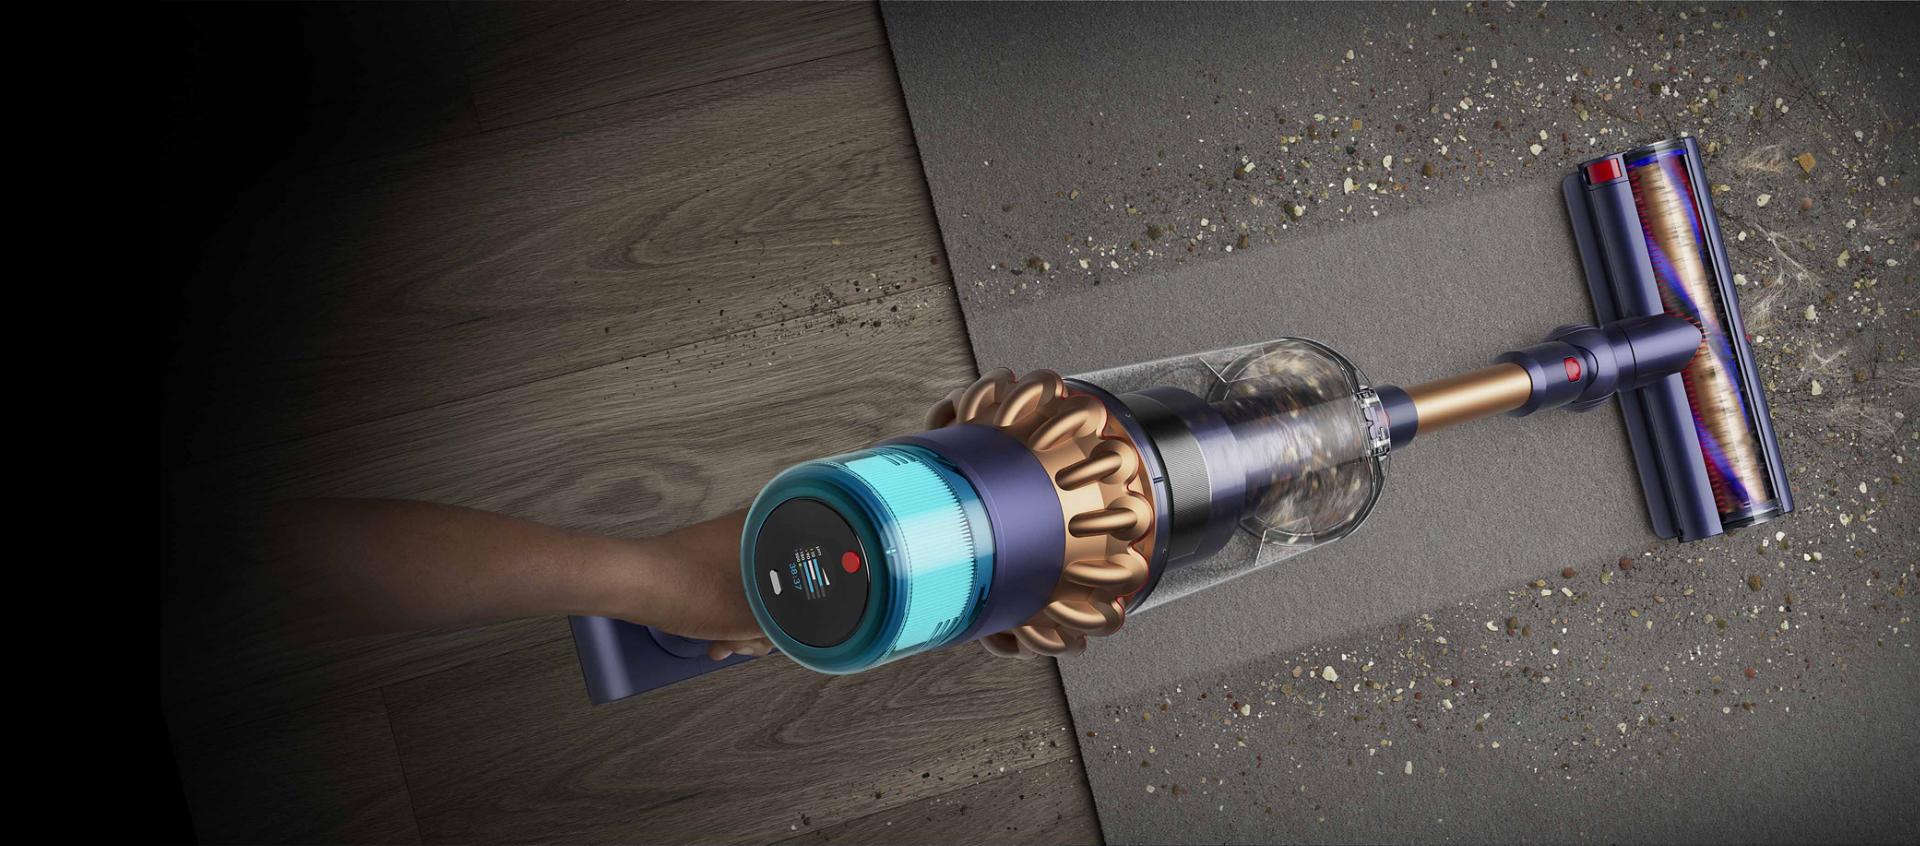 Dyson Gen5outsize shown from above, transferring from a hard floor to a carpet.